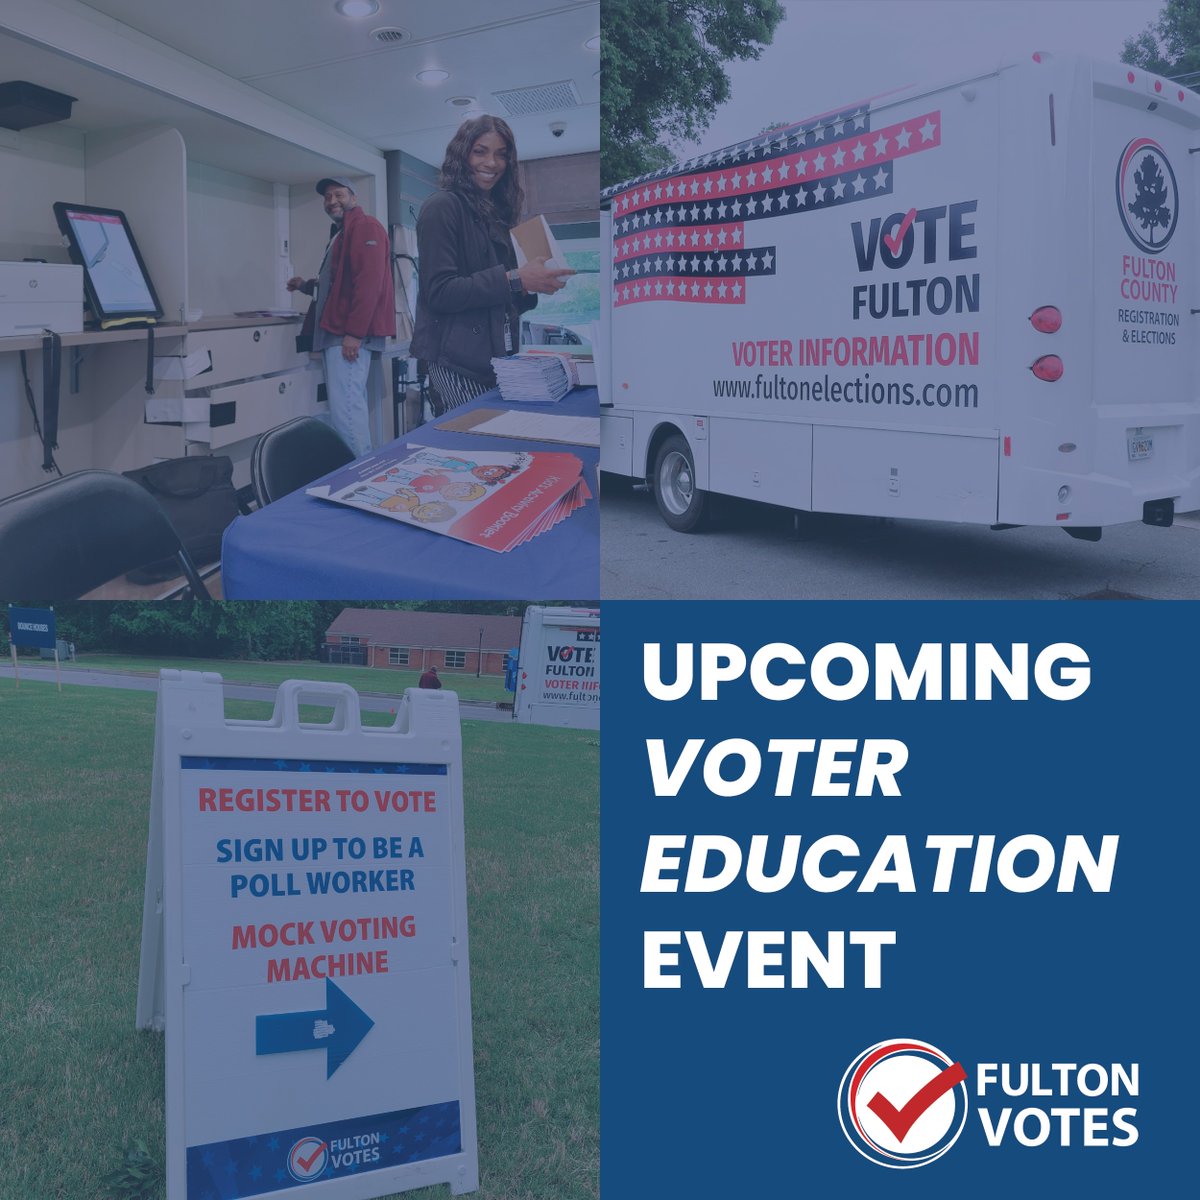 The Voter Education & Outreach team is here to teach you about the elections process in Fulton County! Attend one of the upcoming events to get all the info you need for a smooth voting experience. #FultonVotes #VoterEducation

See a list of events here: fultoncountyga.gov/inside-fulton-…